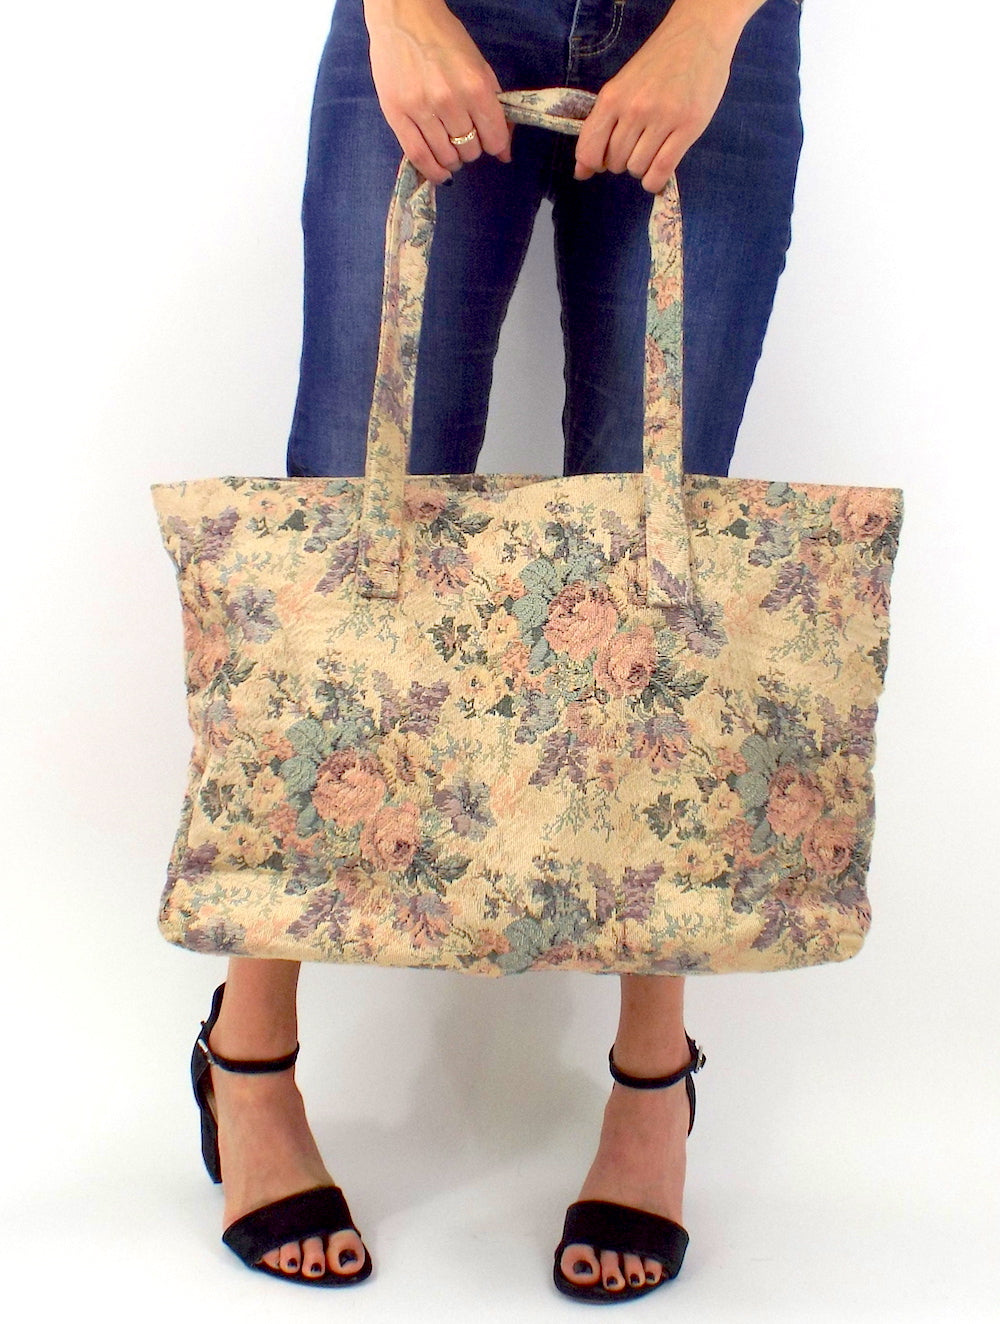 vintage tapestry bag - Bags and Purses - Lace Market: Lolita